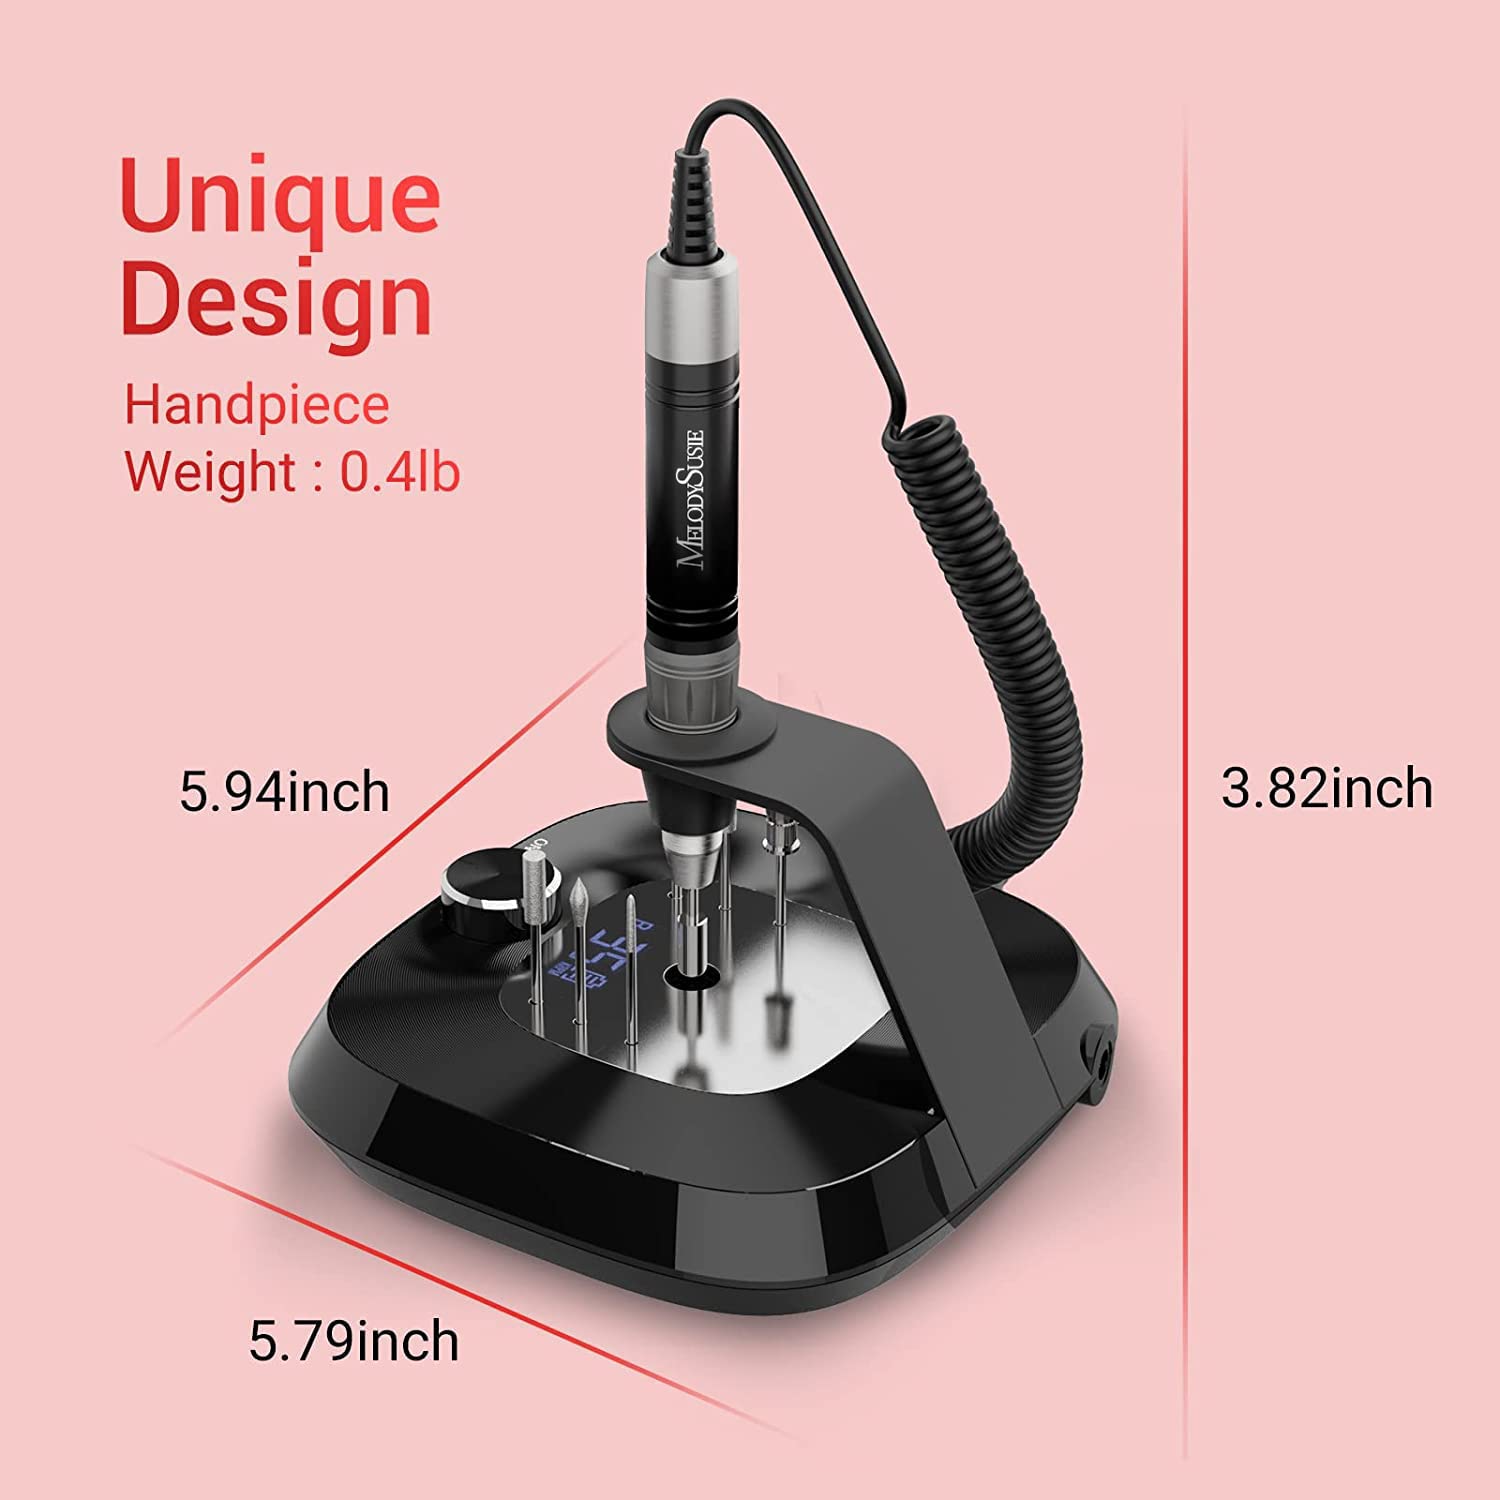 MR3-Kanon Rechargeable Nail Drill 35,000 RPM-Customized (US ONLY)